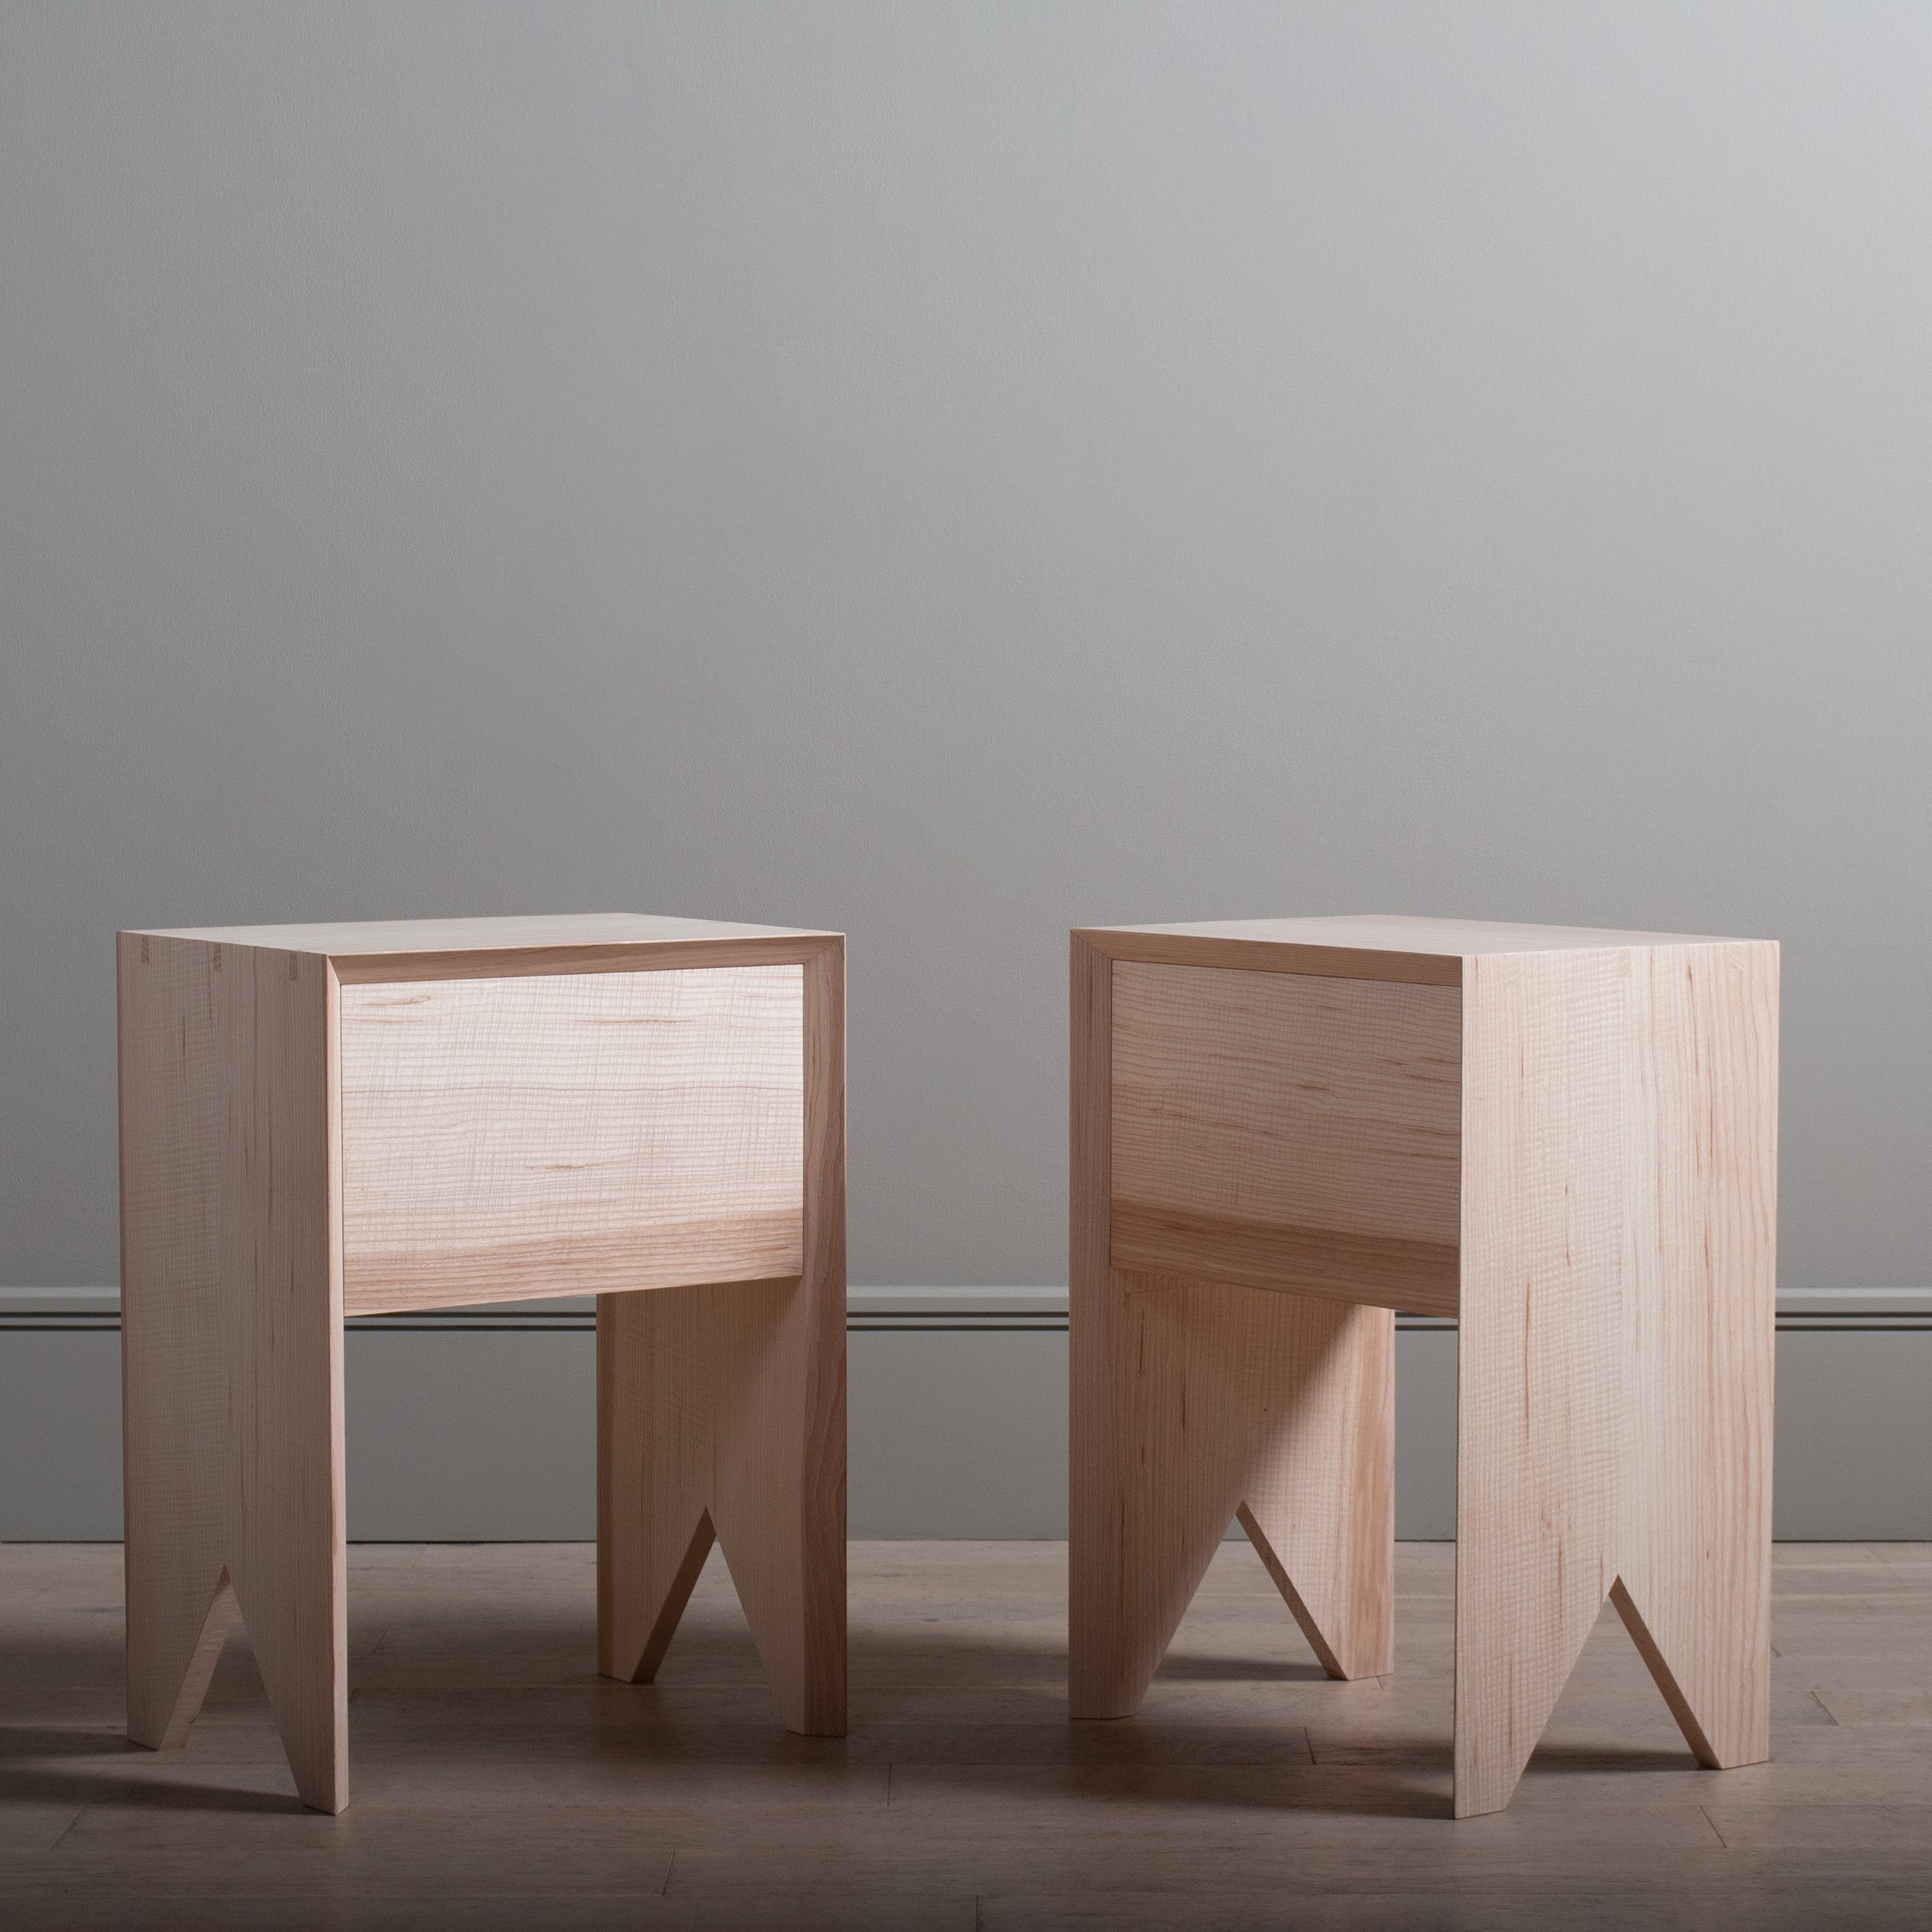 Paar Handcrafted English Ash End Tables / Drawers. (Moderne) im Angebot